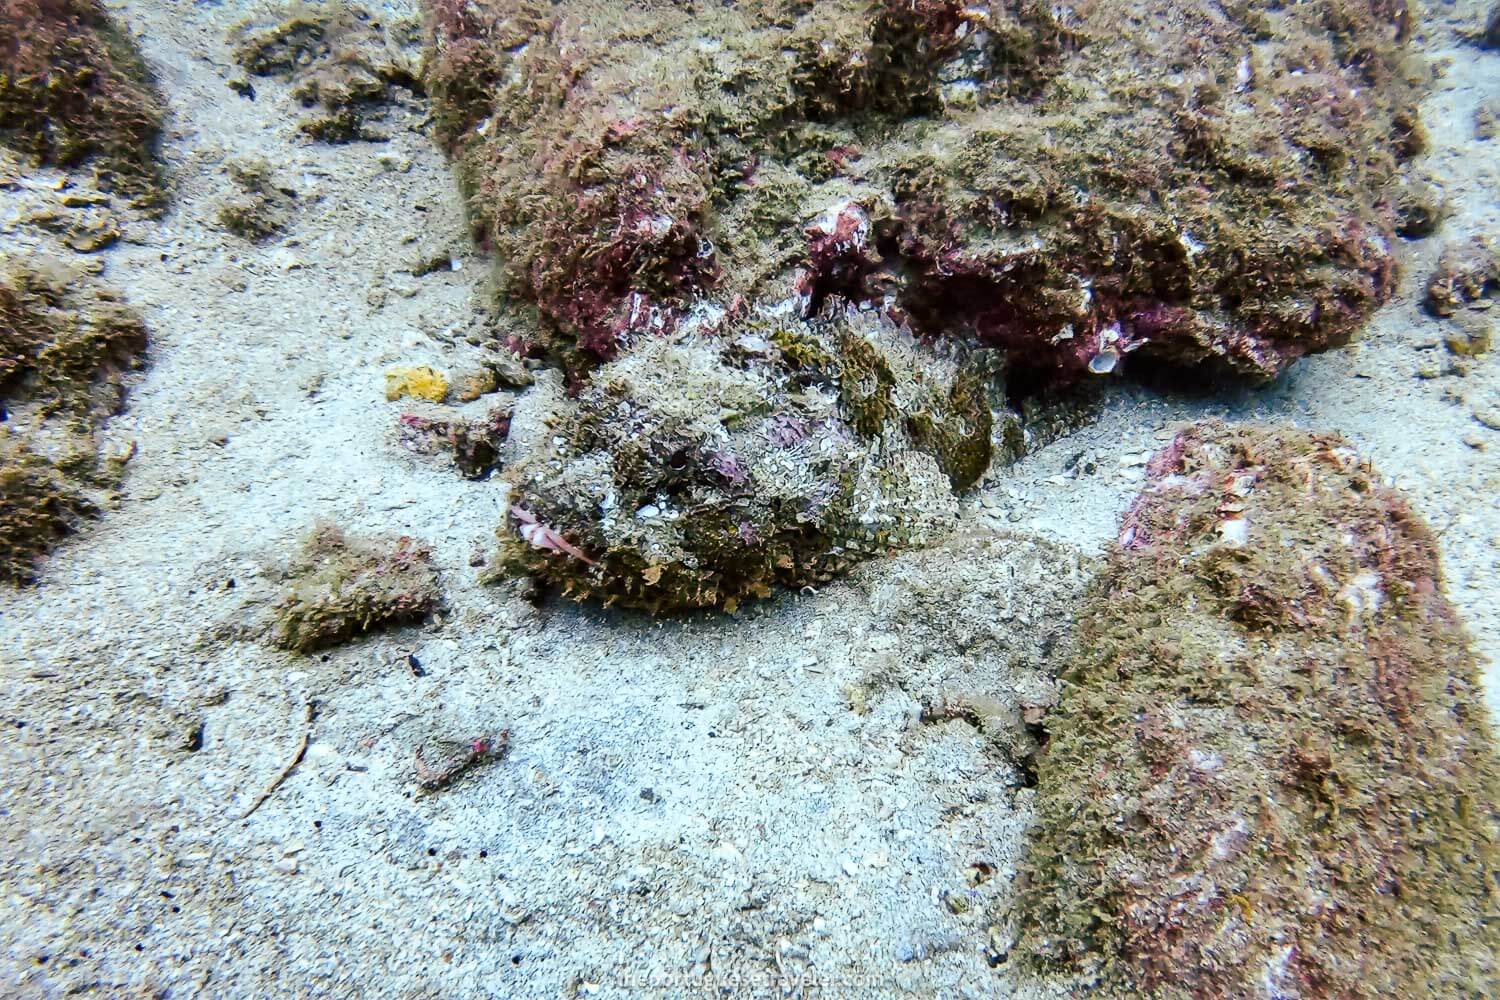 Another Devil Scorpionfish with its tongue out